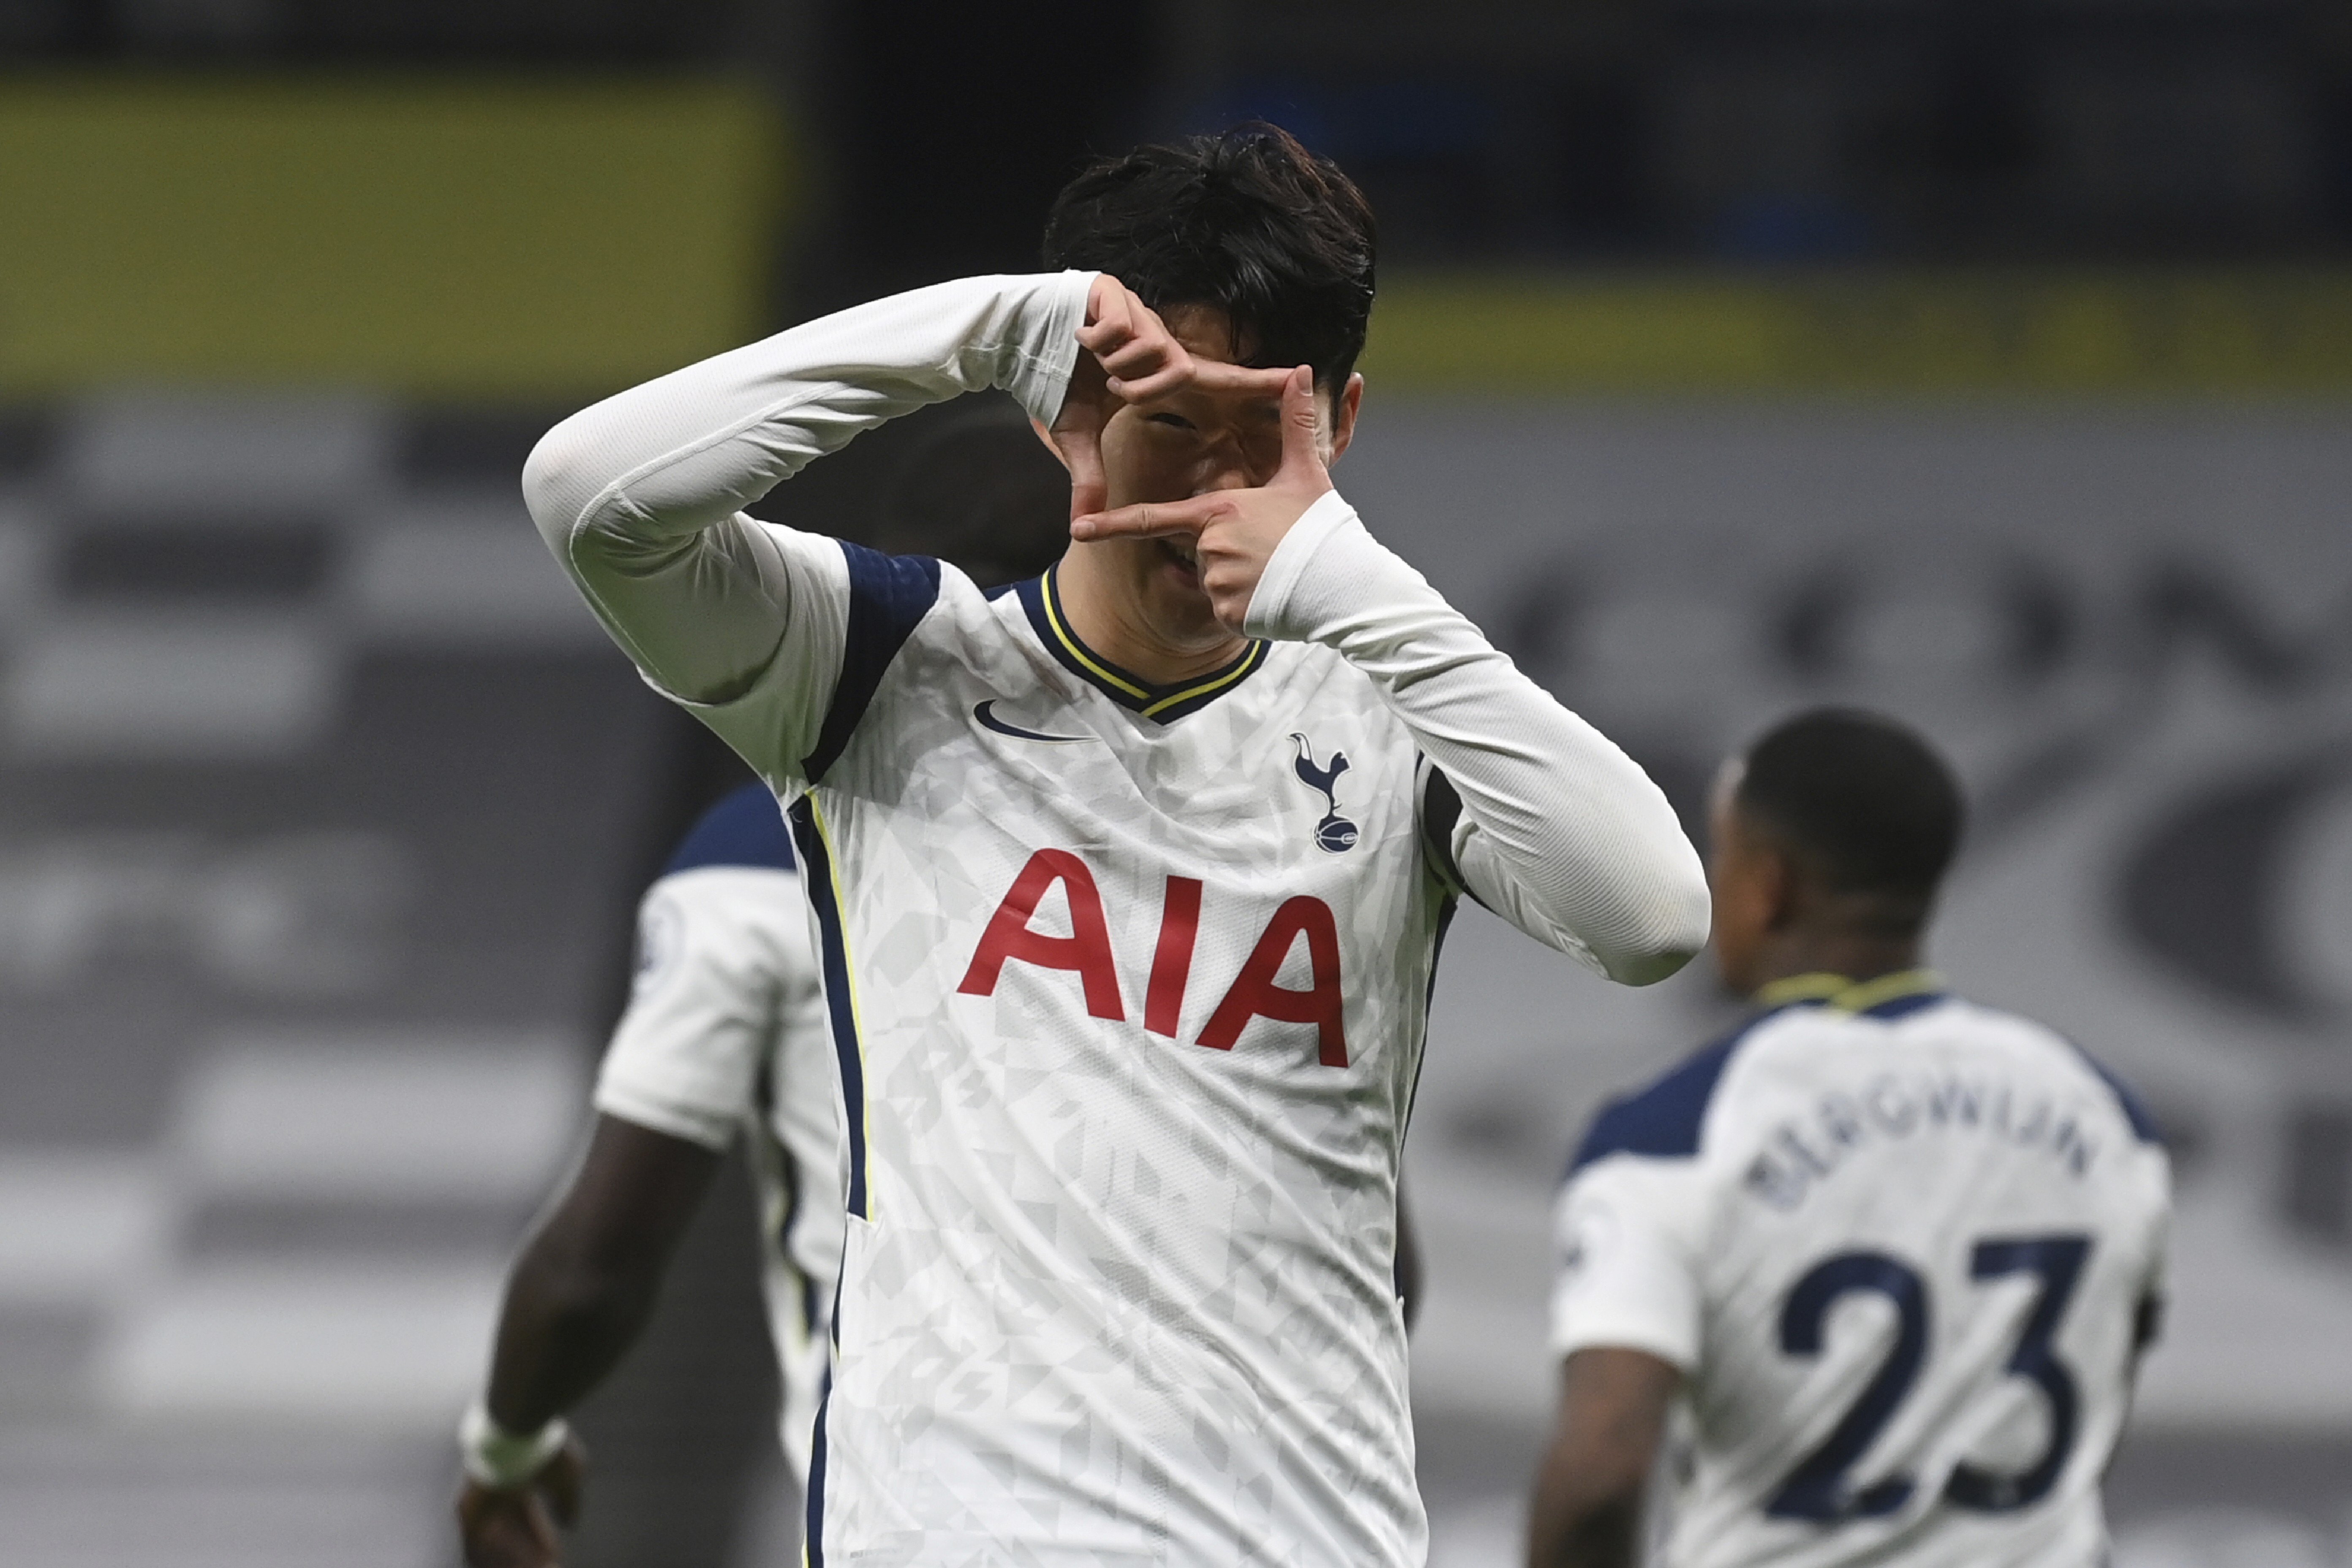 Tottenham Hotspur's Son Heung-min celebrates after scoring in the English Premier League against Manchester City in November, 2020. Photo: AP